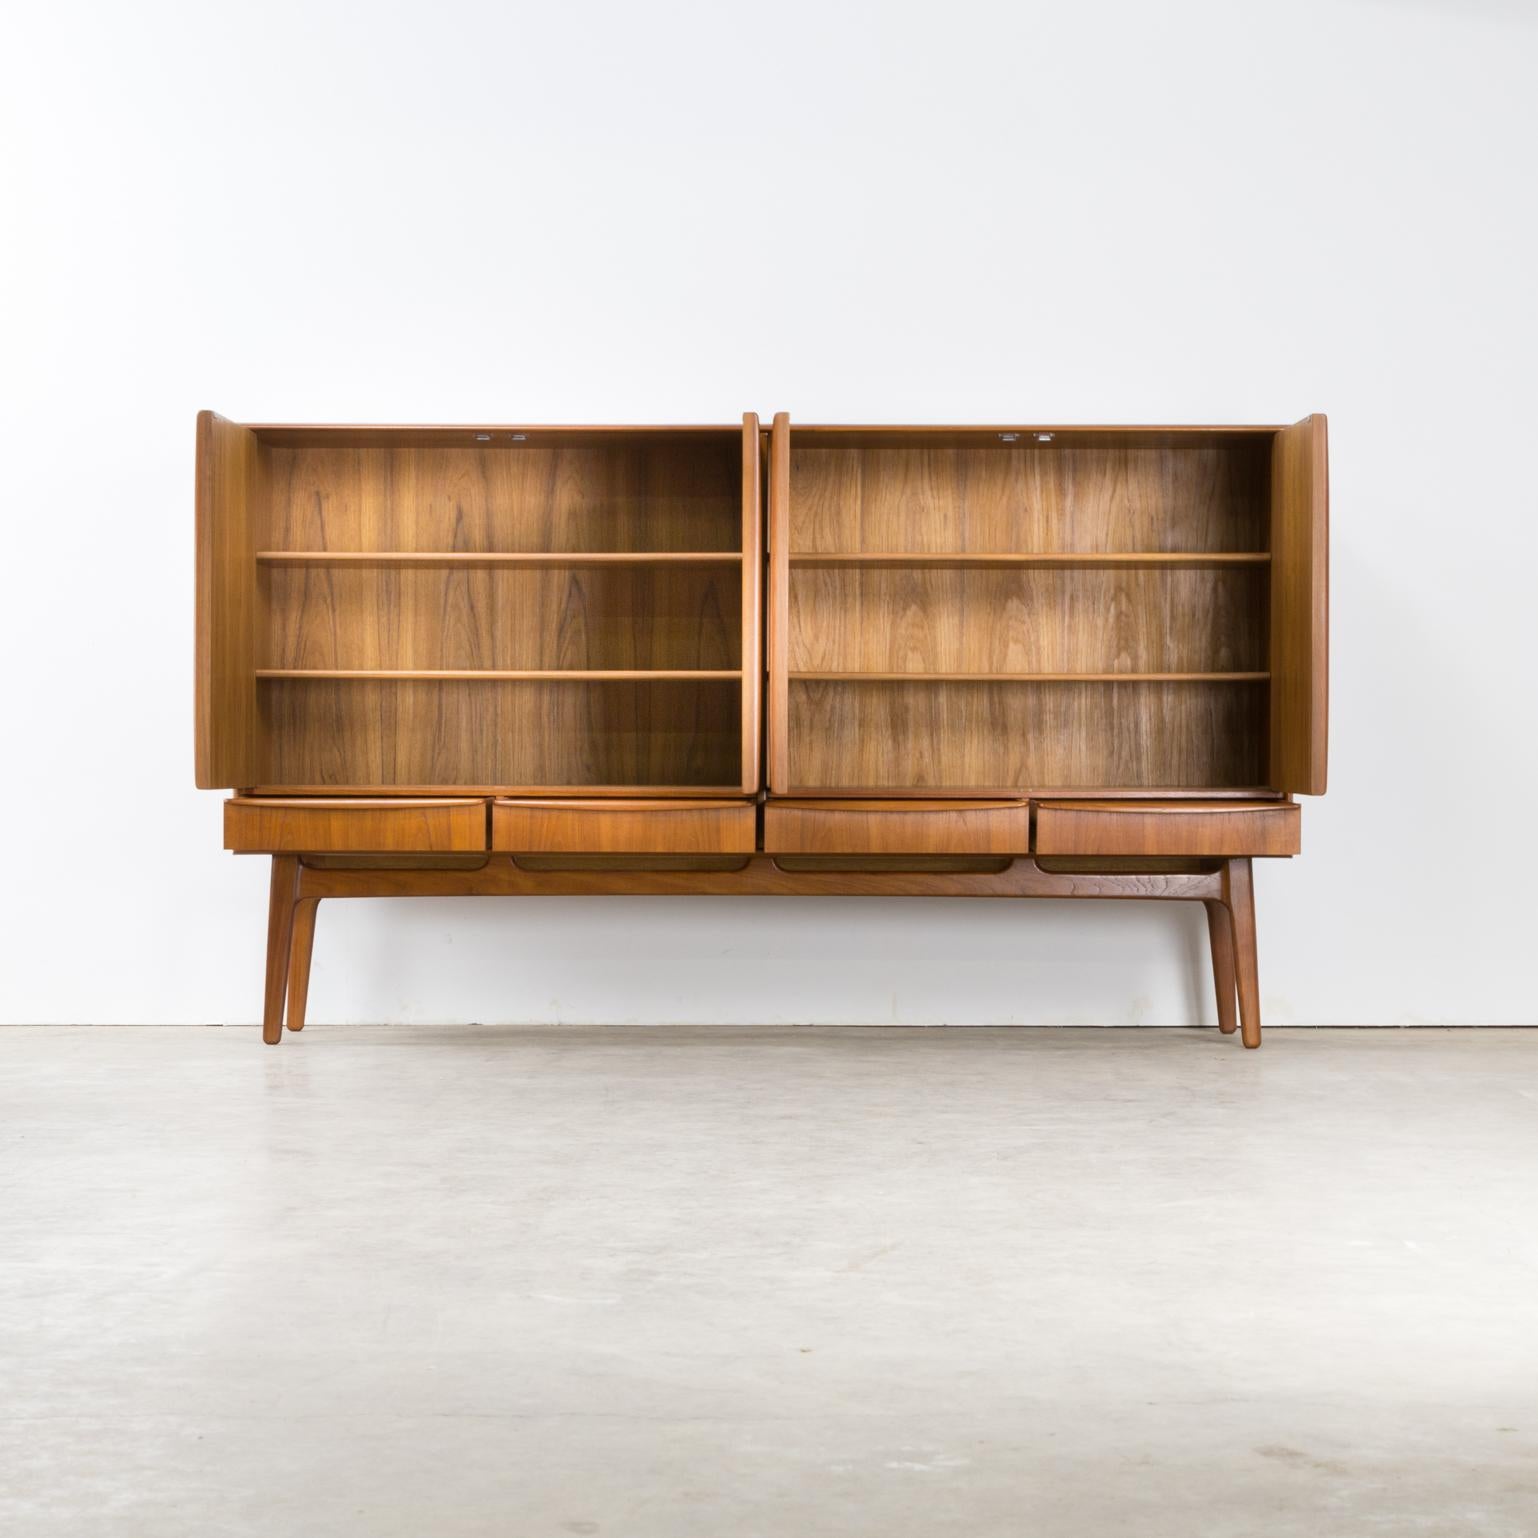 1950s Svend Age Madsen teak high sideboard for Knudsen & Son. Very good condition consistent with age and use.